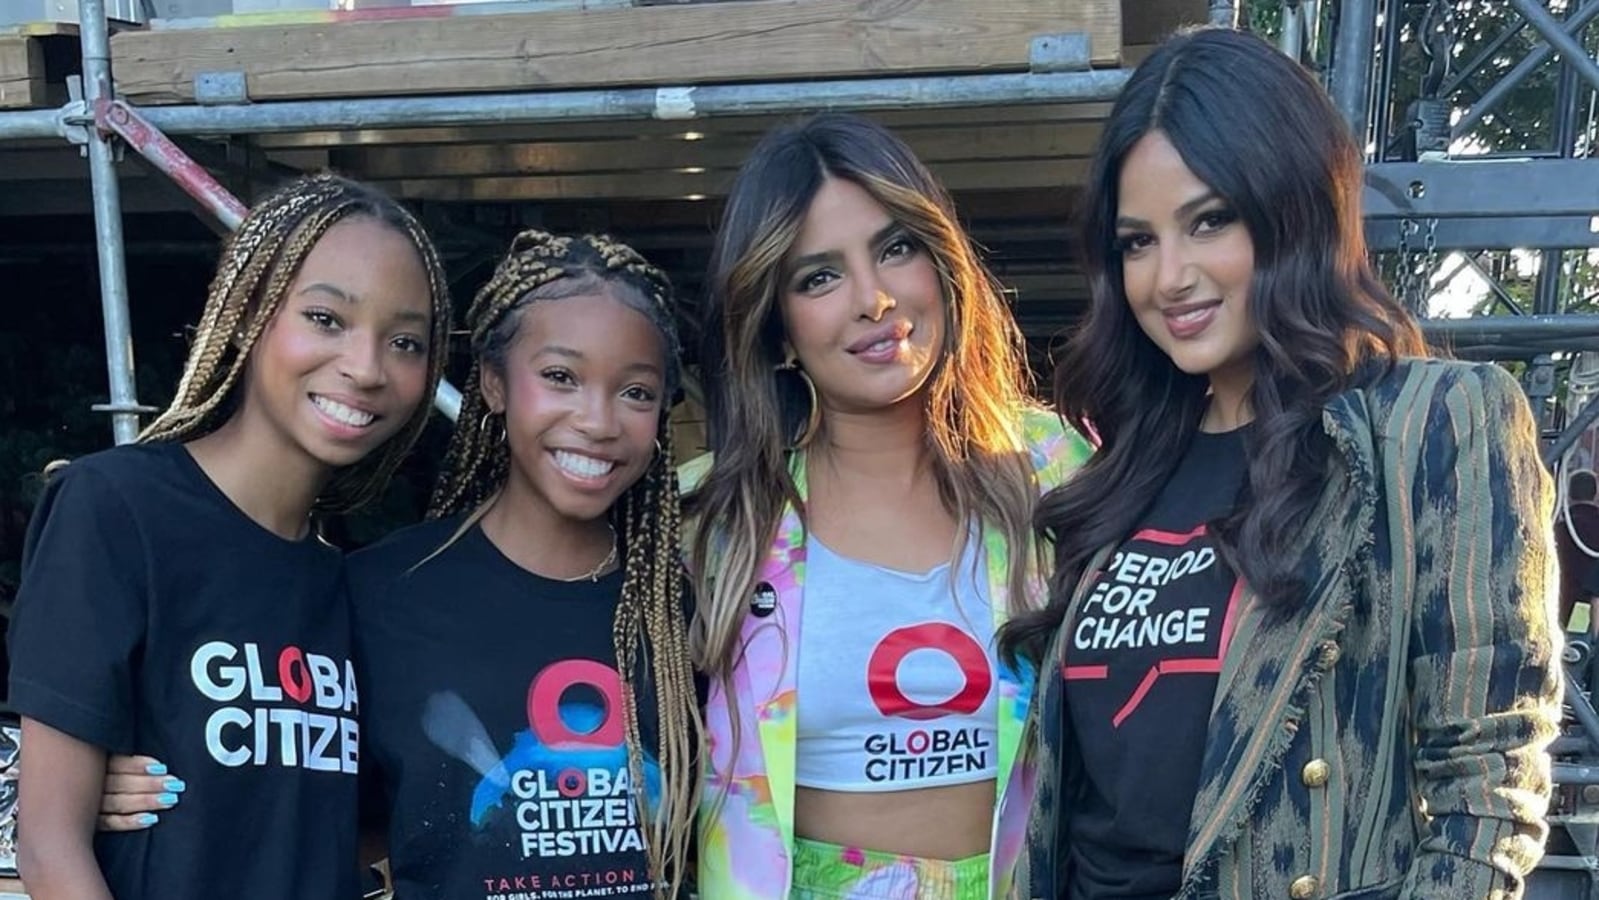 Harnaaz Sandhu poses with Priyanka Chopra at Global Citizen Festival: ‘Couldn’t have asked for us to meet another way’